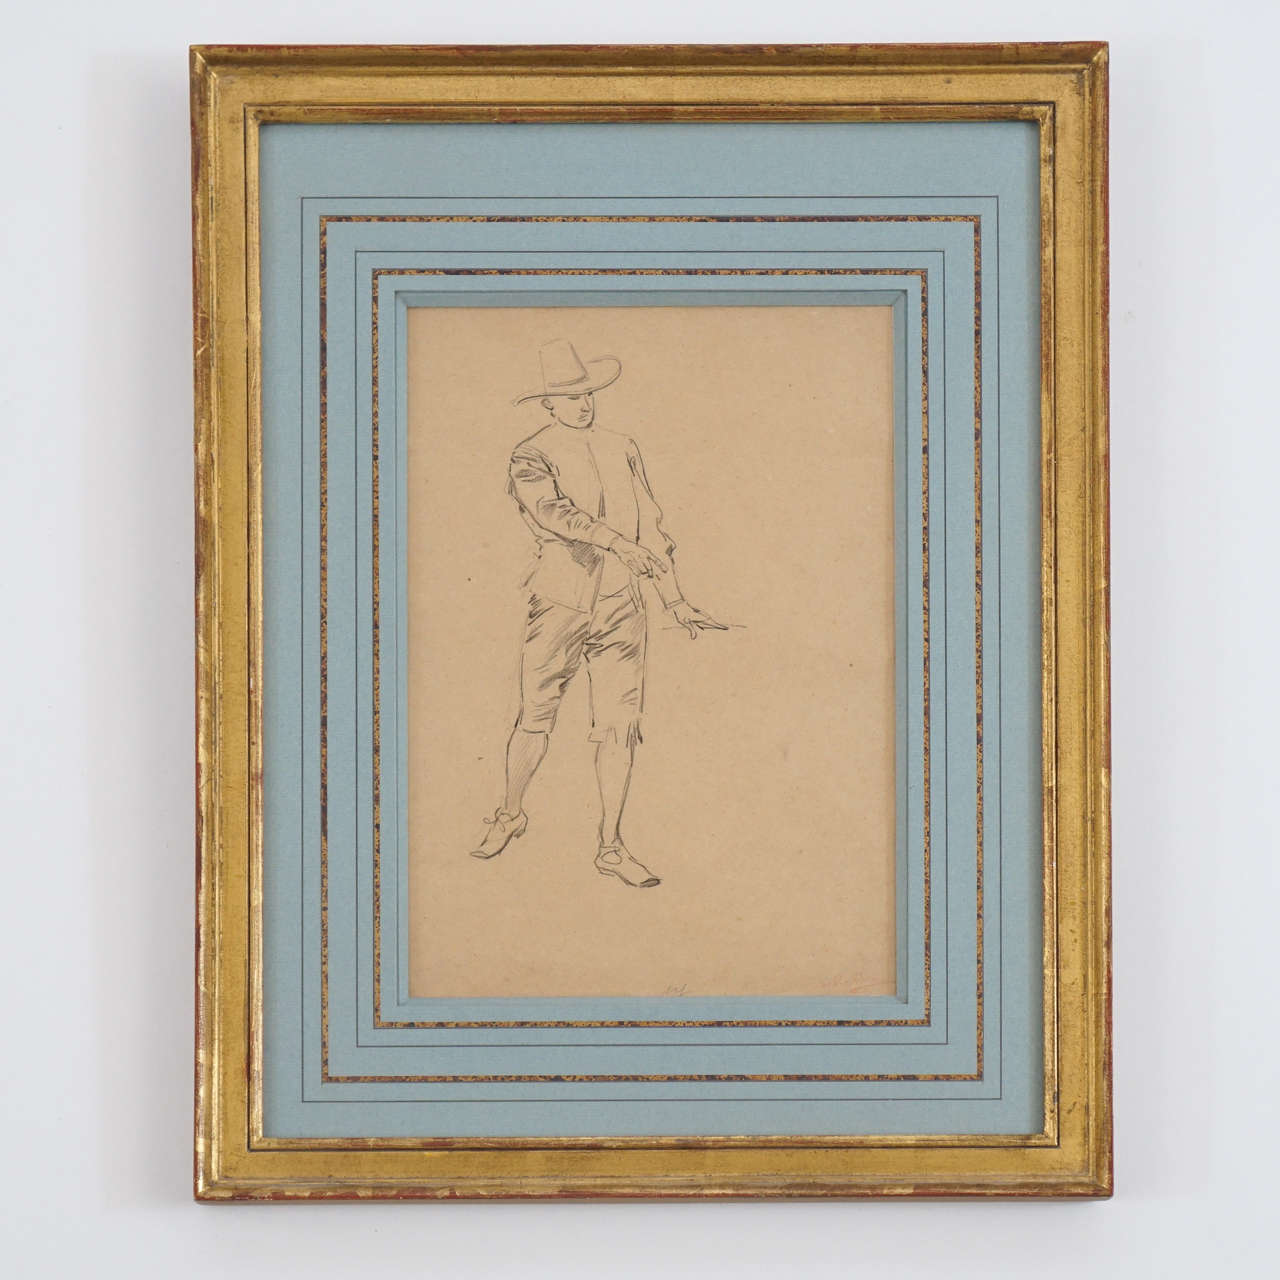 Figurative pencil sketch of a gentleman in 17th century attire by French artist Adrien-Emmanuel Marie (1846 - 1891) housed in a water-gilt frame with blue double-border French matting.  Signed lower right.  Provenance:  Originally purchased at